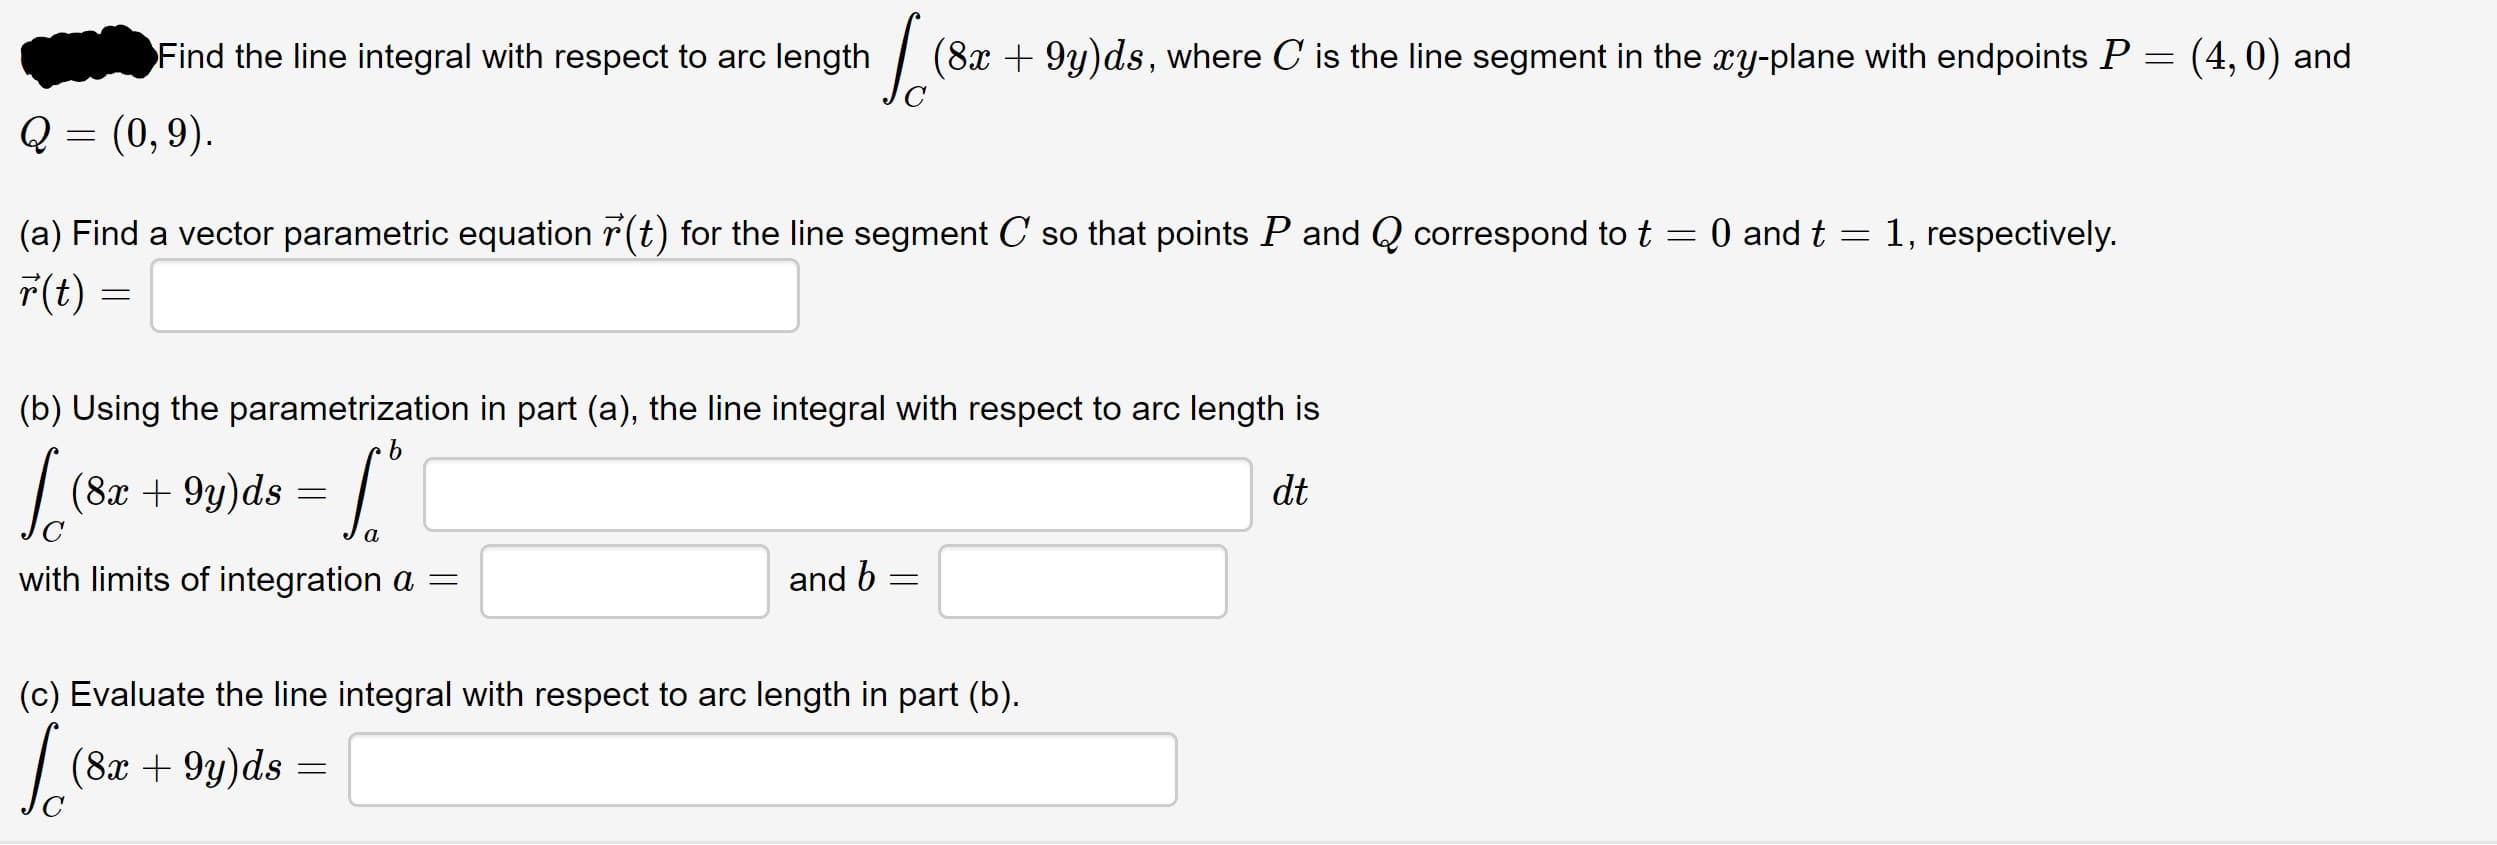 Find the line integral with respect to arc length
(8x + 9y)ds, where C is the line segment in the xy-plane with endpoints P =
(4, 0) and
Q = (0,9).
(a) Find a vector parametric equation r(t) for the line segment C so that points P and Q correspond to t
O and t
1, respectively.
r(t) =
(b) Using the parametrization in part (a), the line integral with respect to arc length is
|
(8x + 9y)ds =
dt
with limits of integration a =
and 6 =
(c) Evaluate the line integral with respect to arc length in part (b).
|
(8x + 9y)ds =
